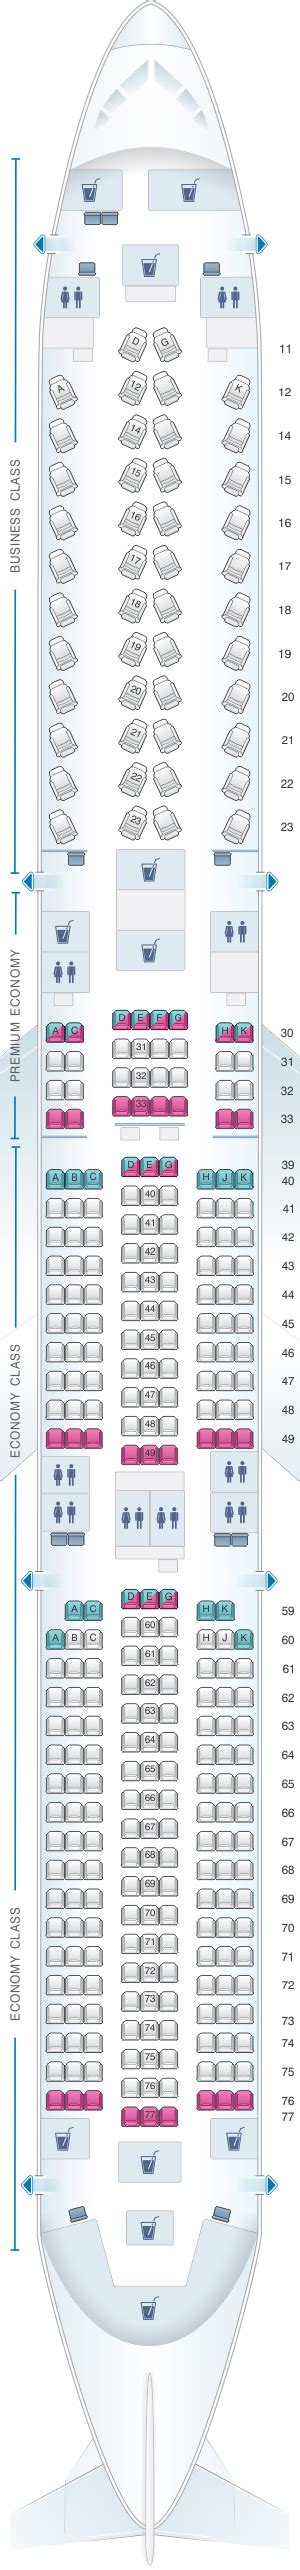 Seat Map Cathay Pacific Airways Airbus A Seatmaestro Hot Sex